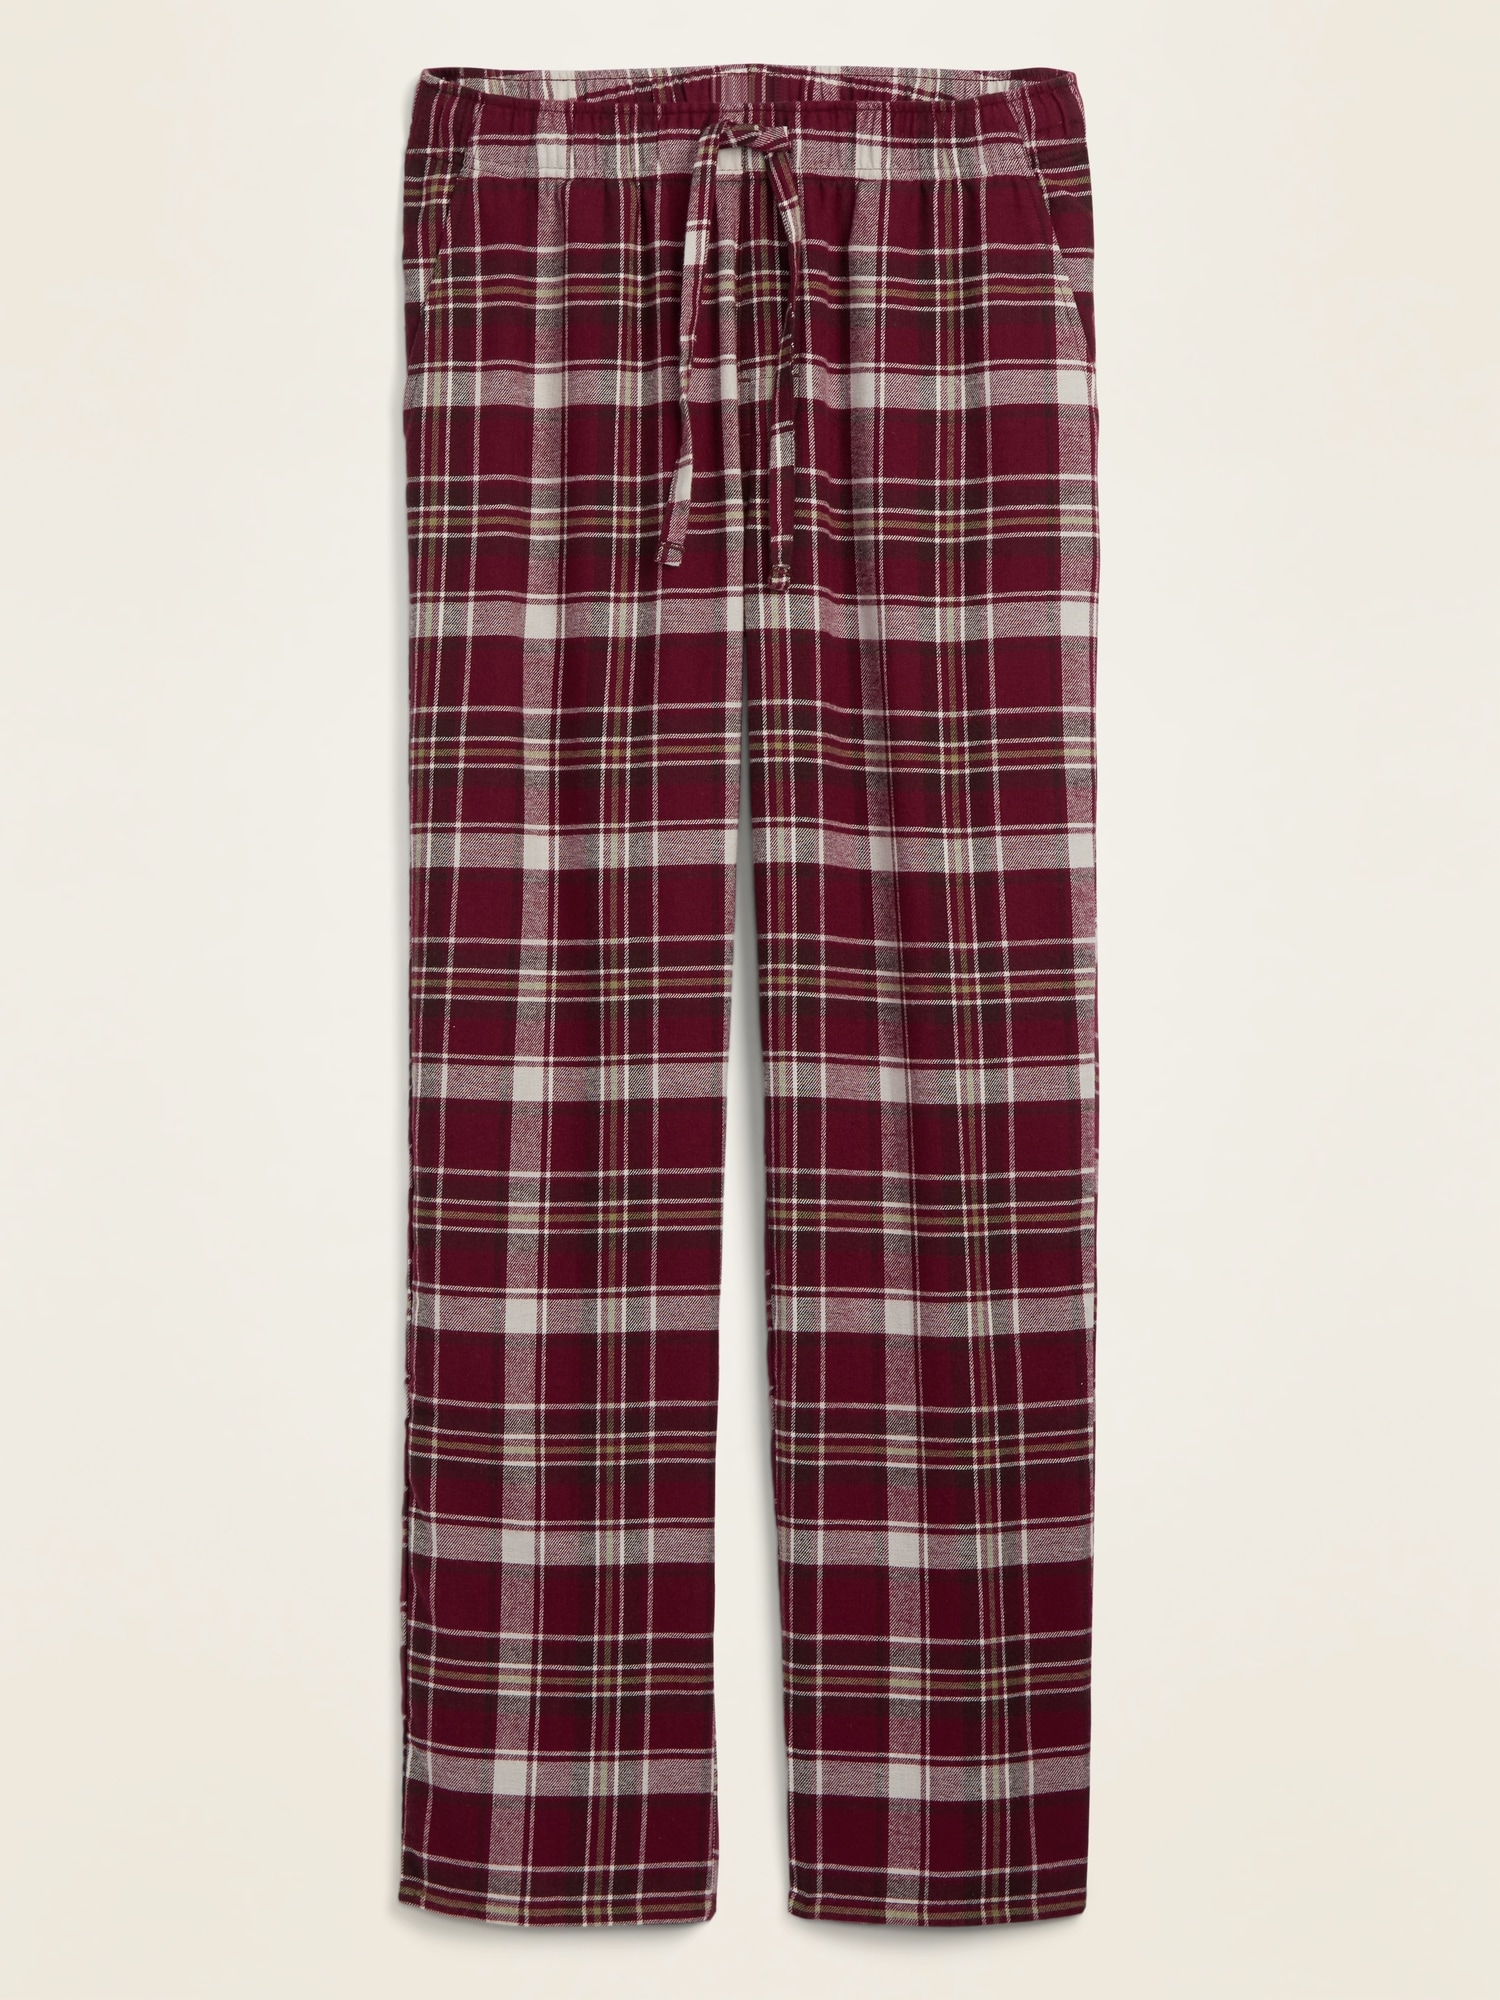 NWT: Men’s Old Navy Plaid Flannel Pajama Pants, Red/Black, Size XL 